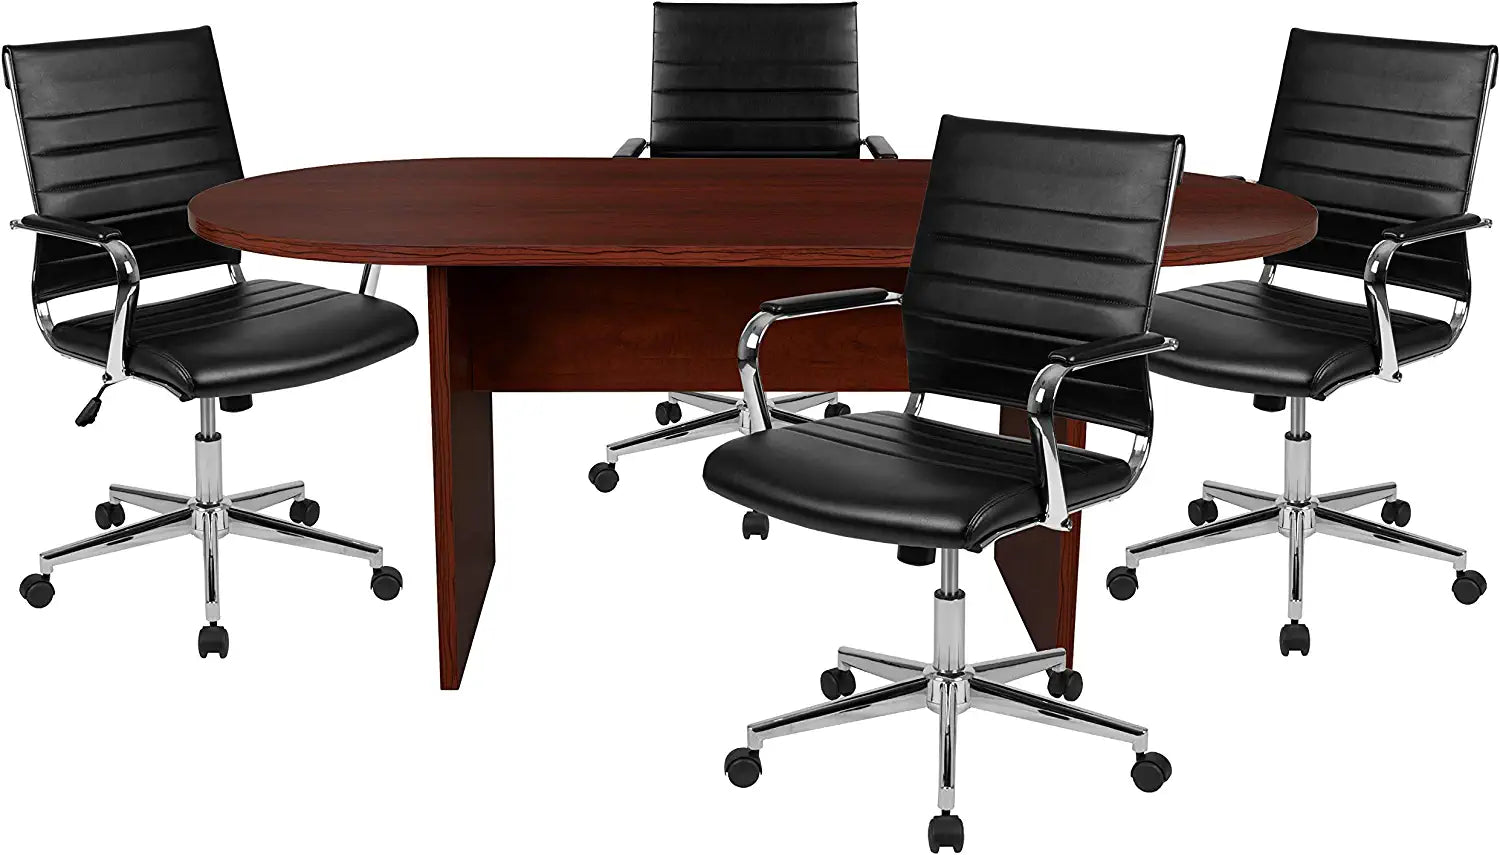 Flash Furniture 5 Piece Mahogany Oval Conference Table Set with 4 Black LeatherSoft Ribbed Executive Chairs